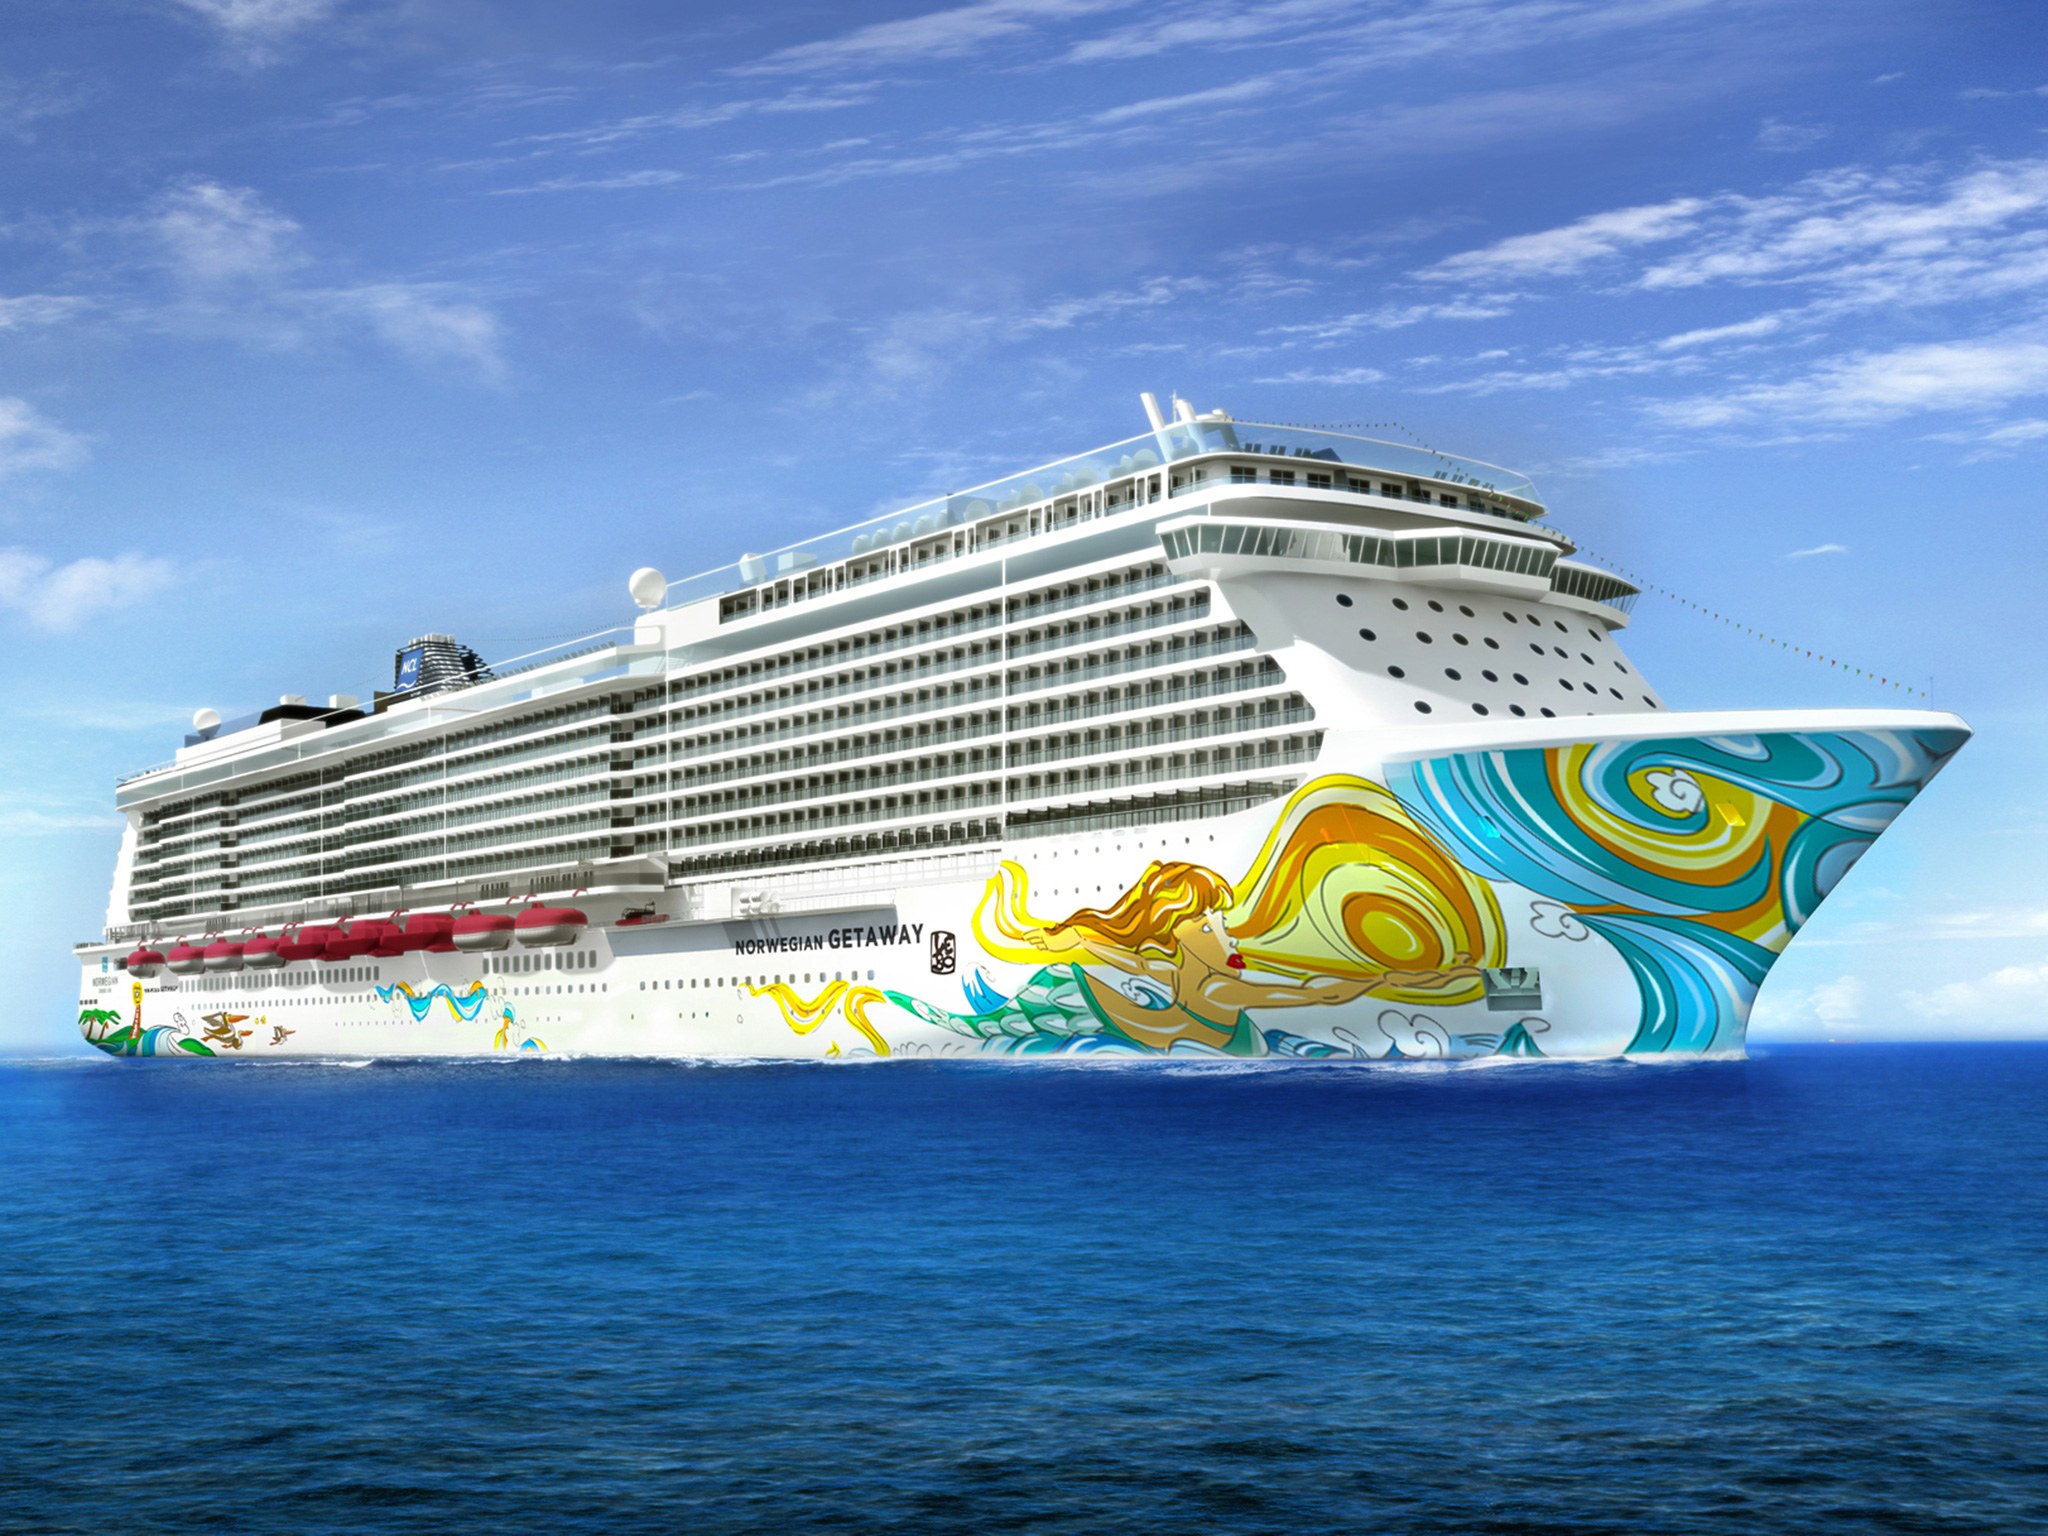 Norwegian Cruise Line provides first look at the new project Leonardo Cruise Ships